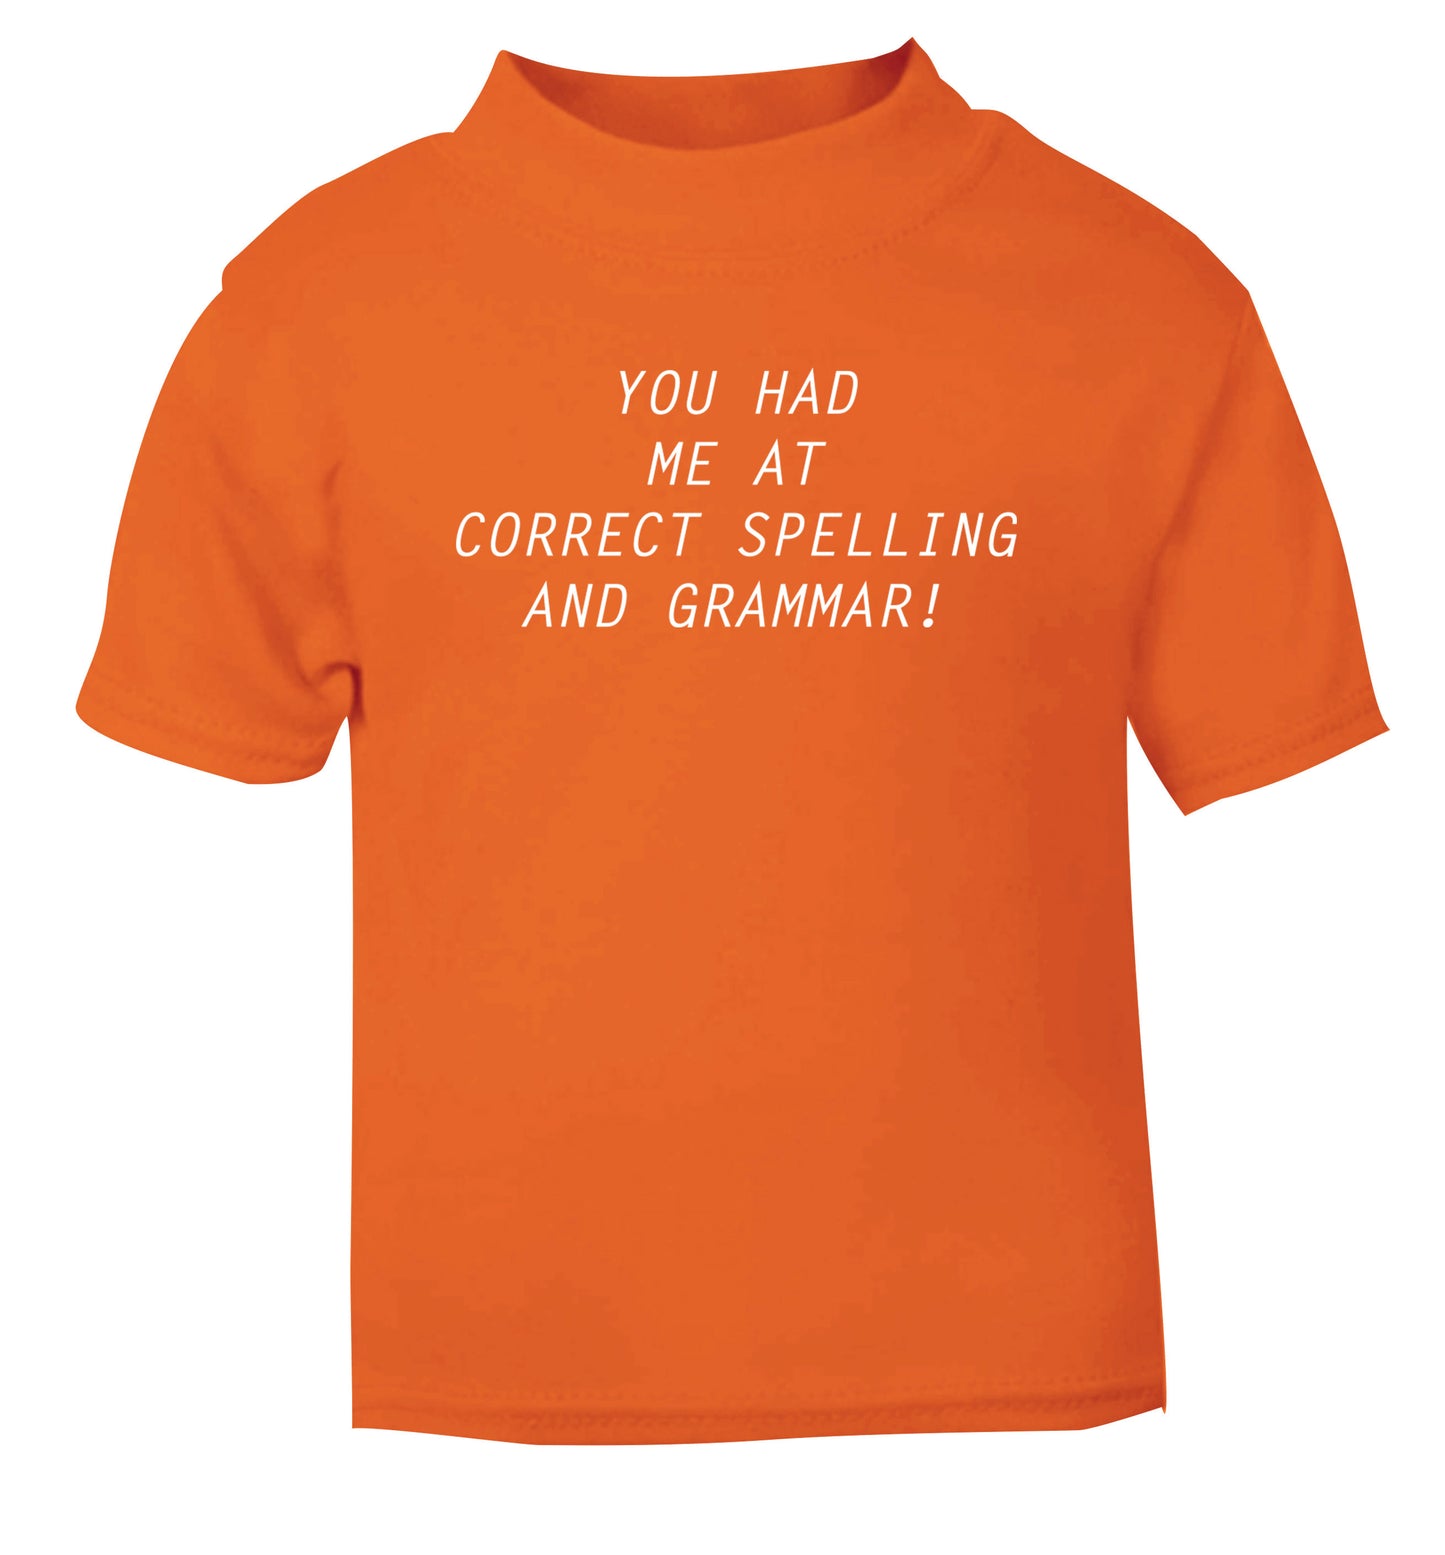 You had me at correct spelling and grammar orange Baby Toddler Tshirt 2 Years